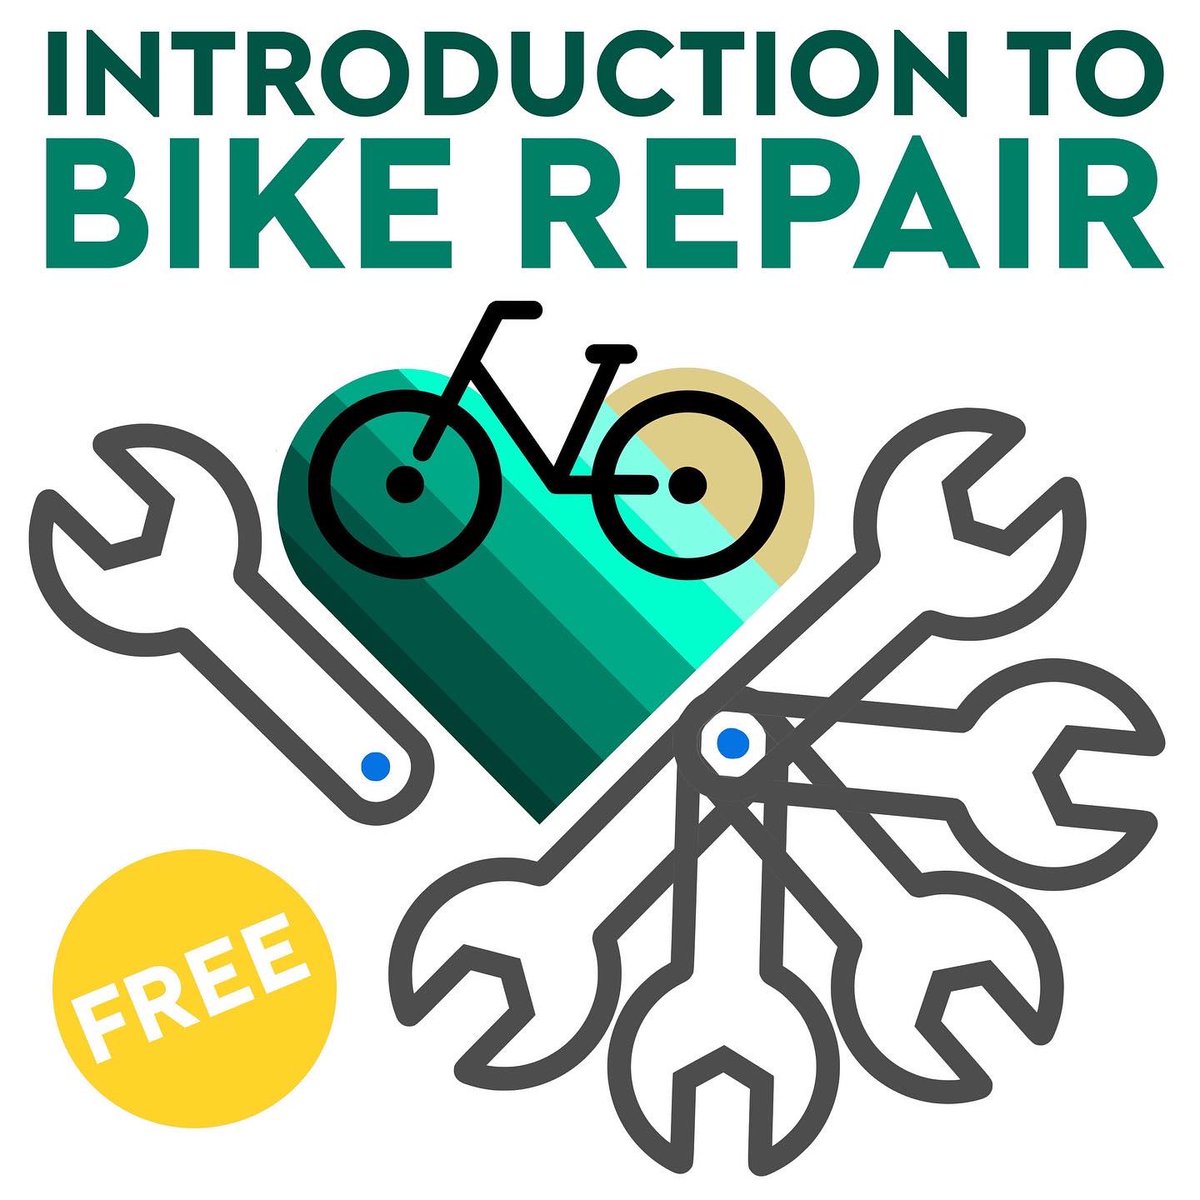 Our introduction to bike repair class is finally coming to #GreatYarmouth on Sat 2nd July from 1-3pm… and it’s free!

Ask all those questions about basic bike fixing that you never knew who to ask 🚲🧡🌍

Places are limited so DM us or email to dan@mybike.repair to book a spot